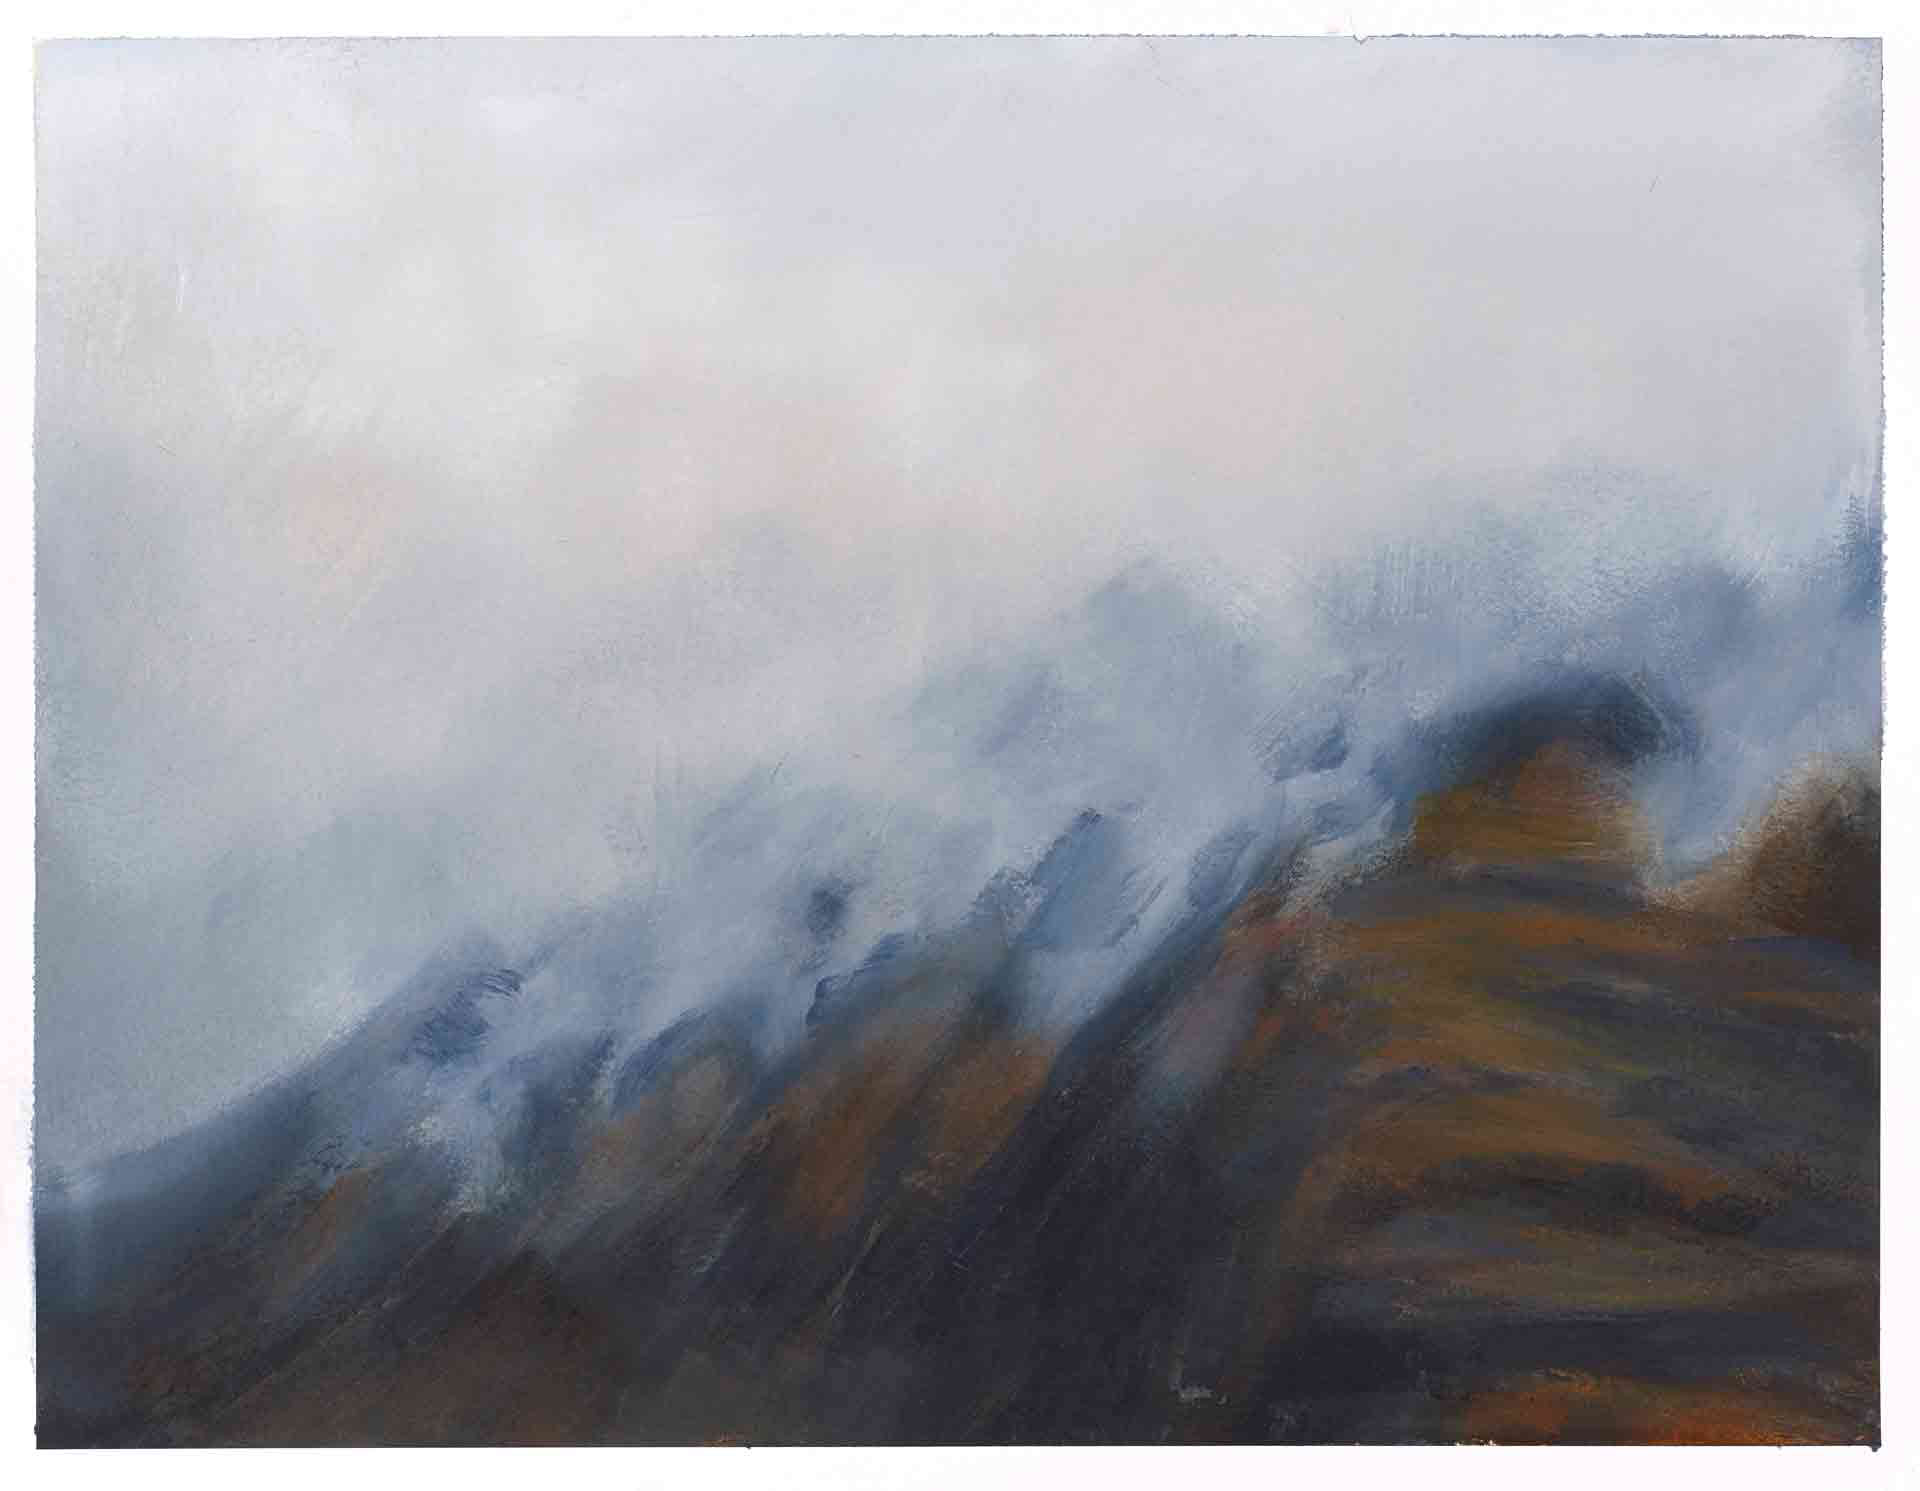 Harris Mists - Landscape Painting By Victoria Orr Ewing